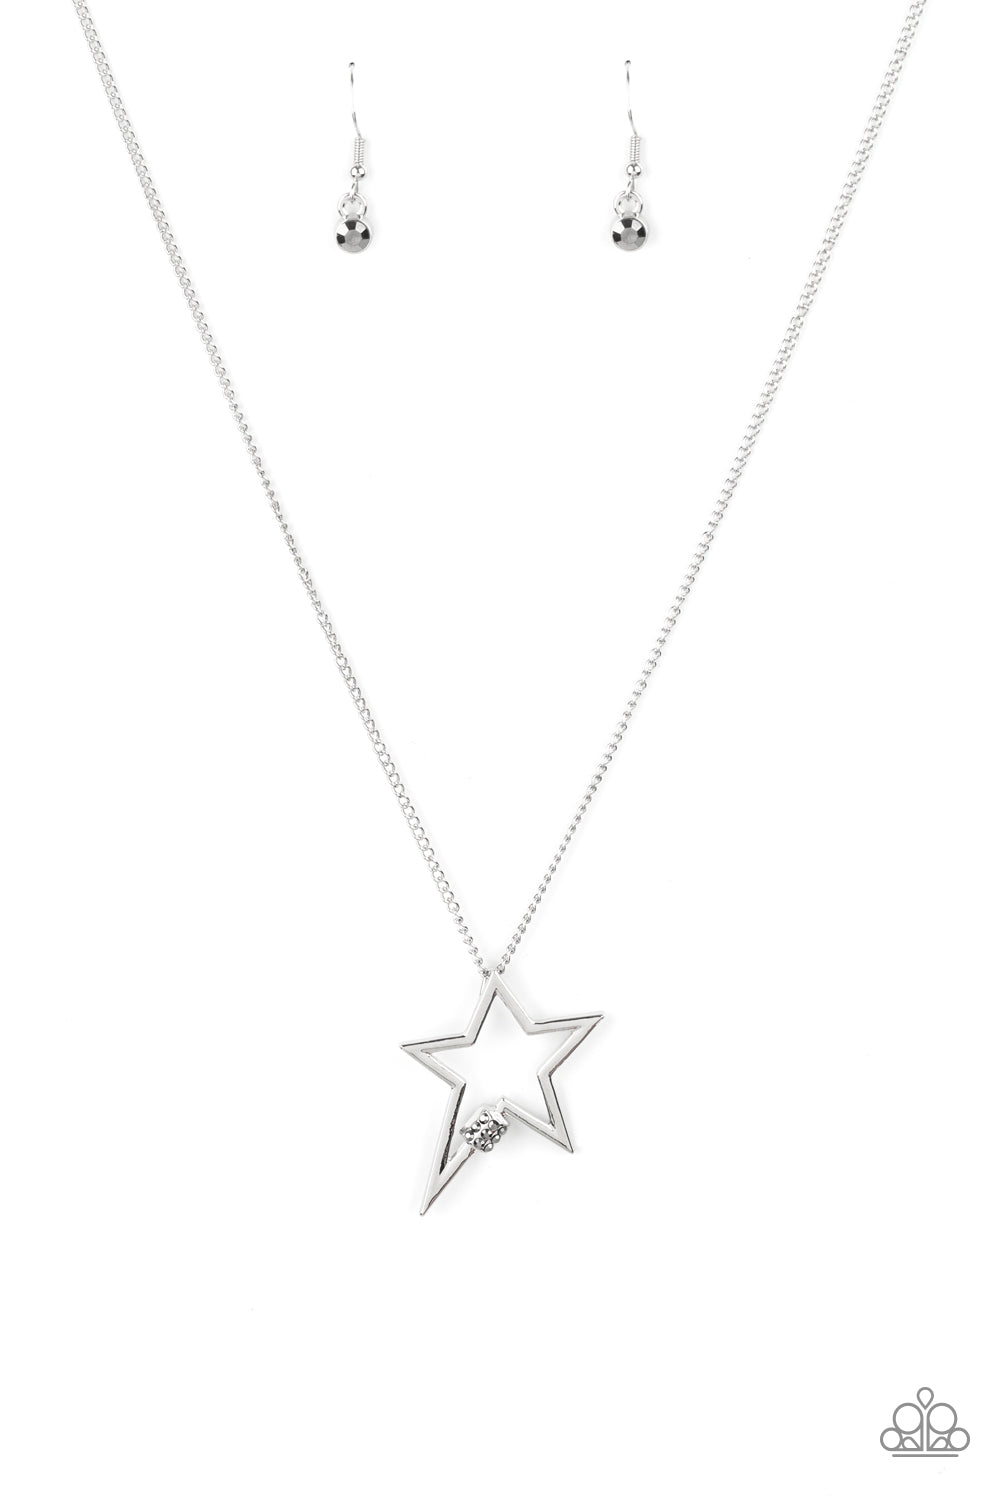 Light Up The Sky Silver Necklace - Paparazzi Accessories  Infused with a dainty hematite rhinestone beaded accent, a striking silver star glides along a shiny silver chain below the collar, creating a stellar pendant. Features an adjustable clasp closure.  All Paparazzi Accessories are lead free and nickel free!  Sold as one individual necklace. Includes one pair of matching earrings.